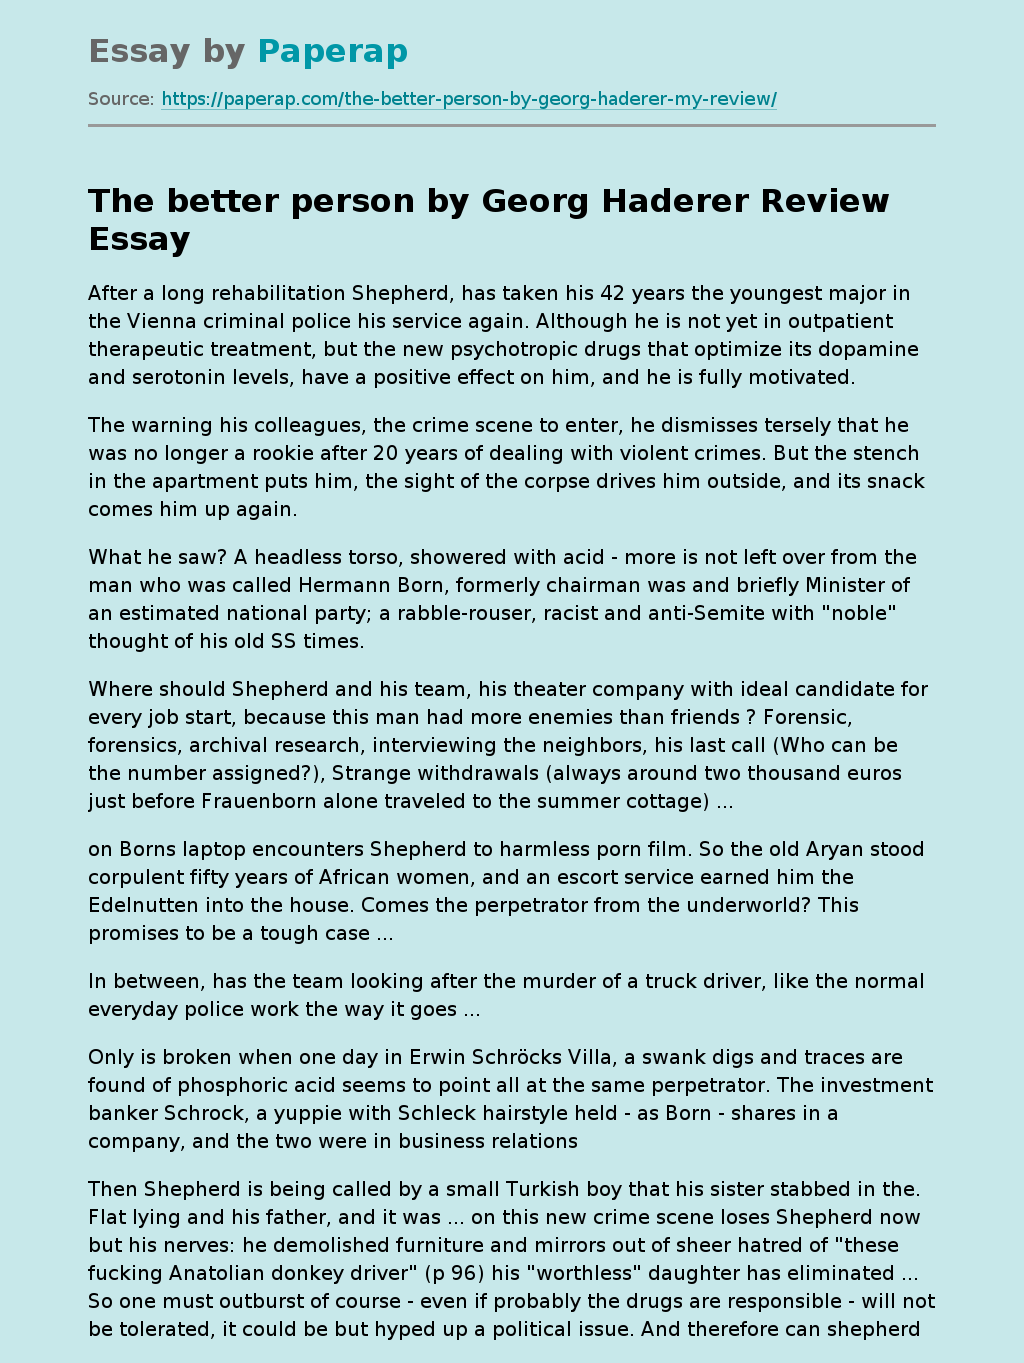 The Better Person By Georg Haderer Review